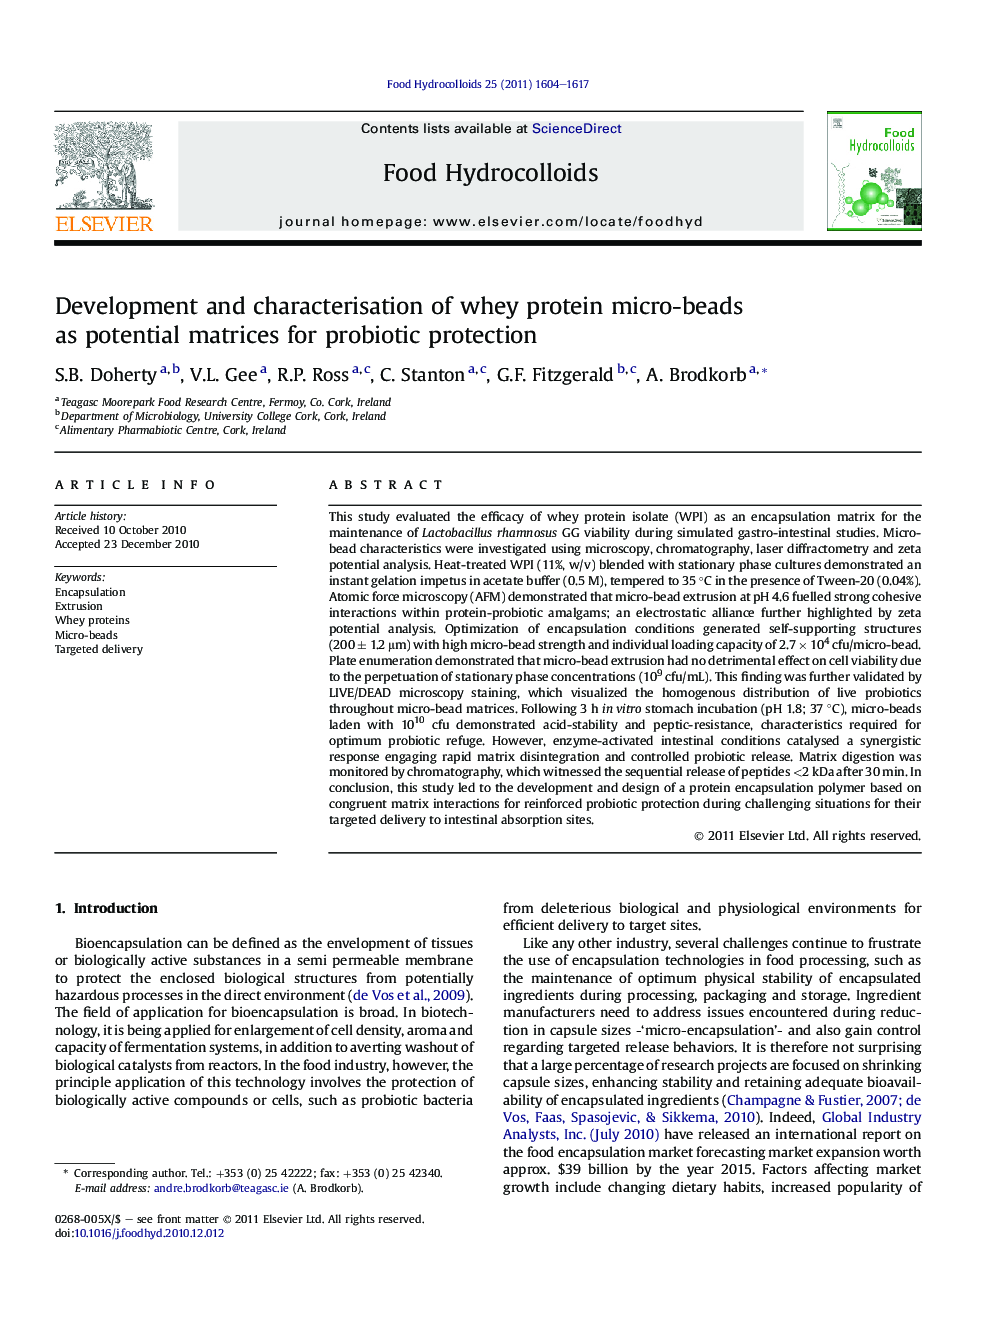 Development and characterisation of whey protein micro-beads as potential matrices for probiotic protection